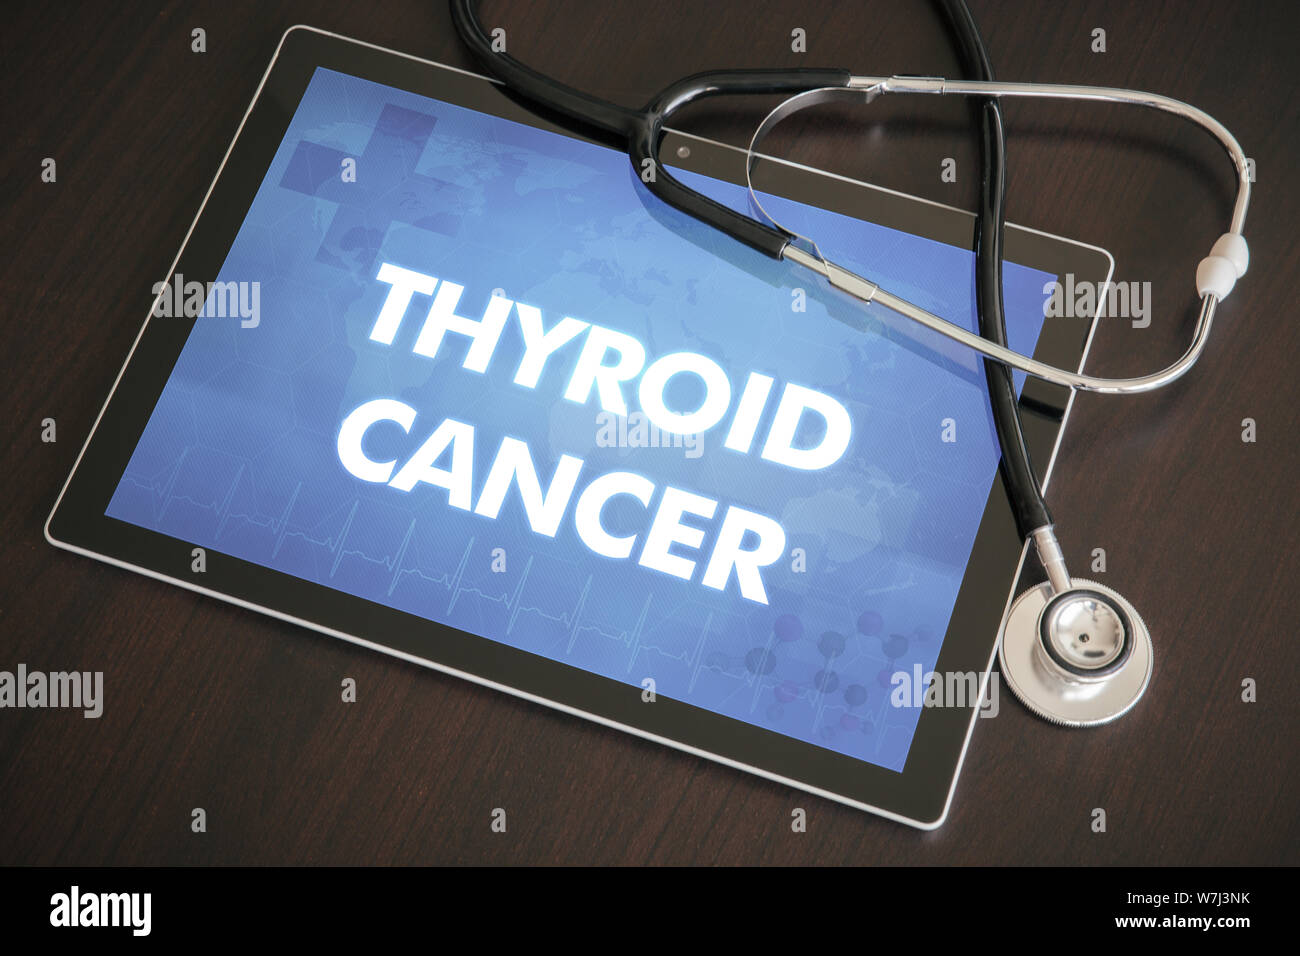 Thyroid cancer (endocrine disease) diagnosis medical concept on tablet screen with stethoscope. Stock Photo